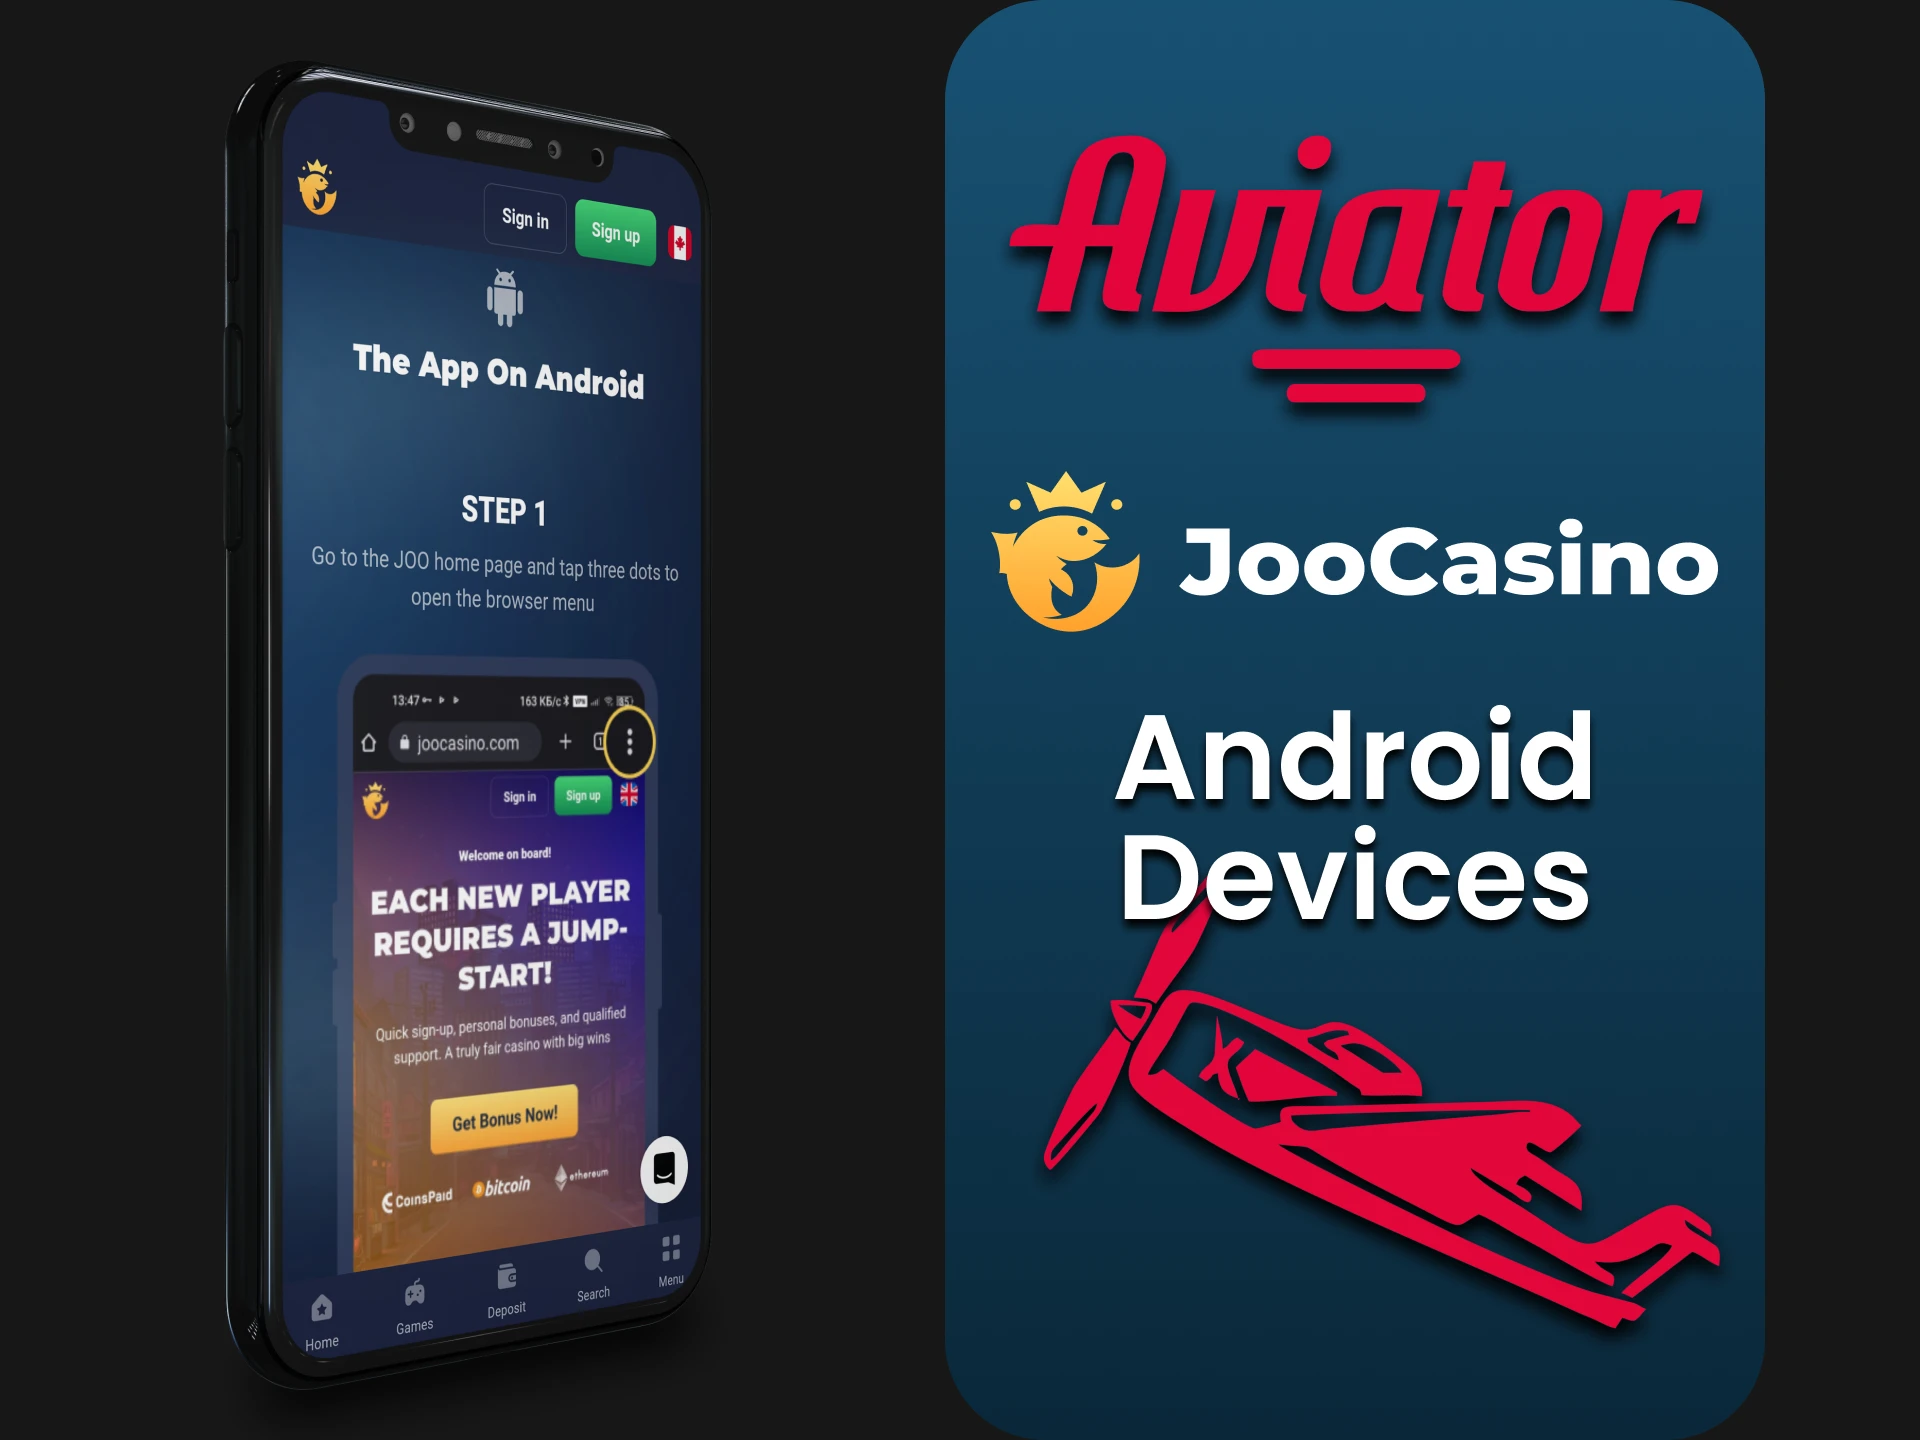 To play Aviator in the Joo Casino application, use Android devices.